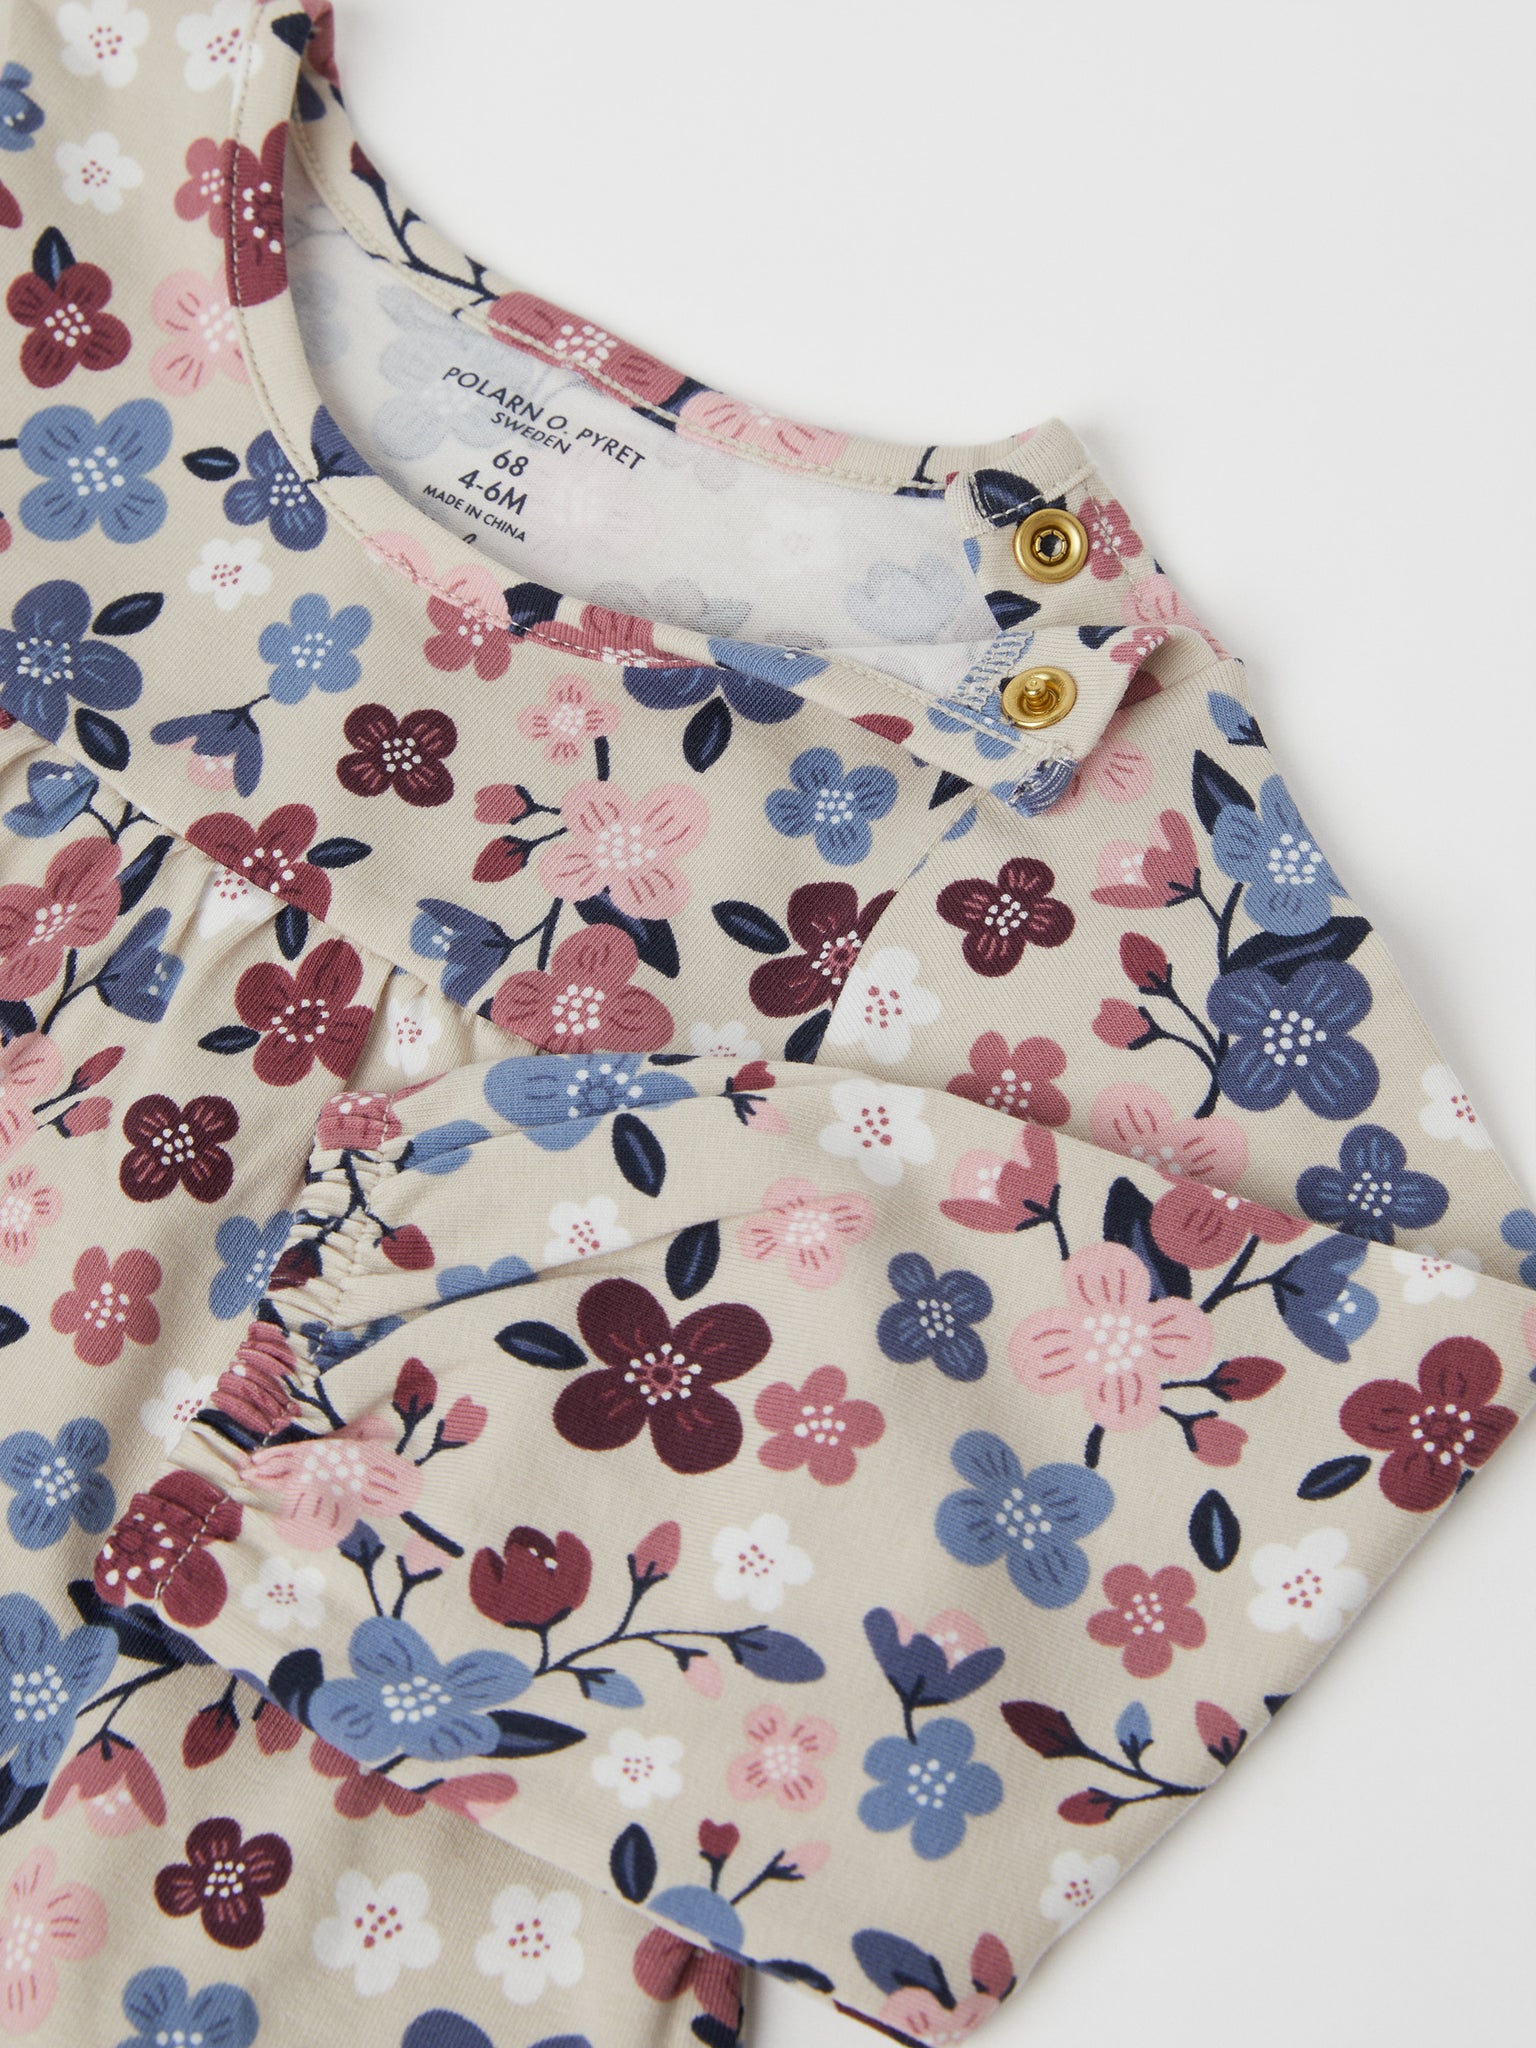 Organic Cotton Floral Baby Dress from the Polarn O. Pyret baby collection. Nordic baby clothes made from sustainable sources.